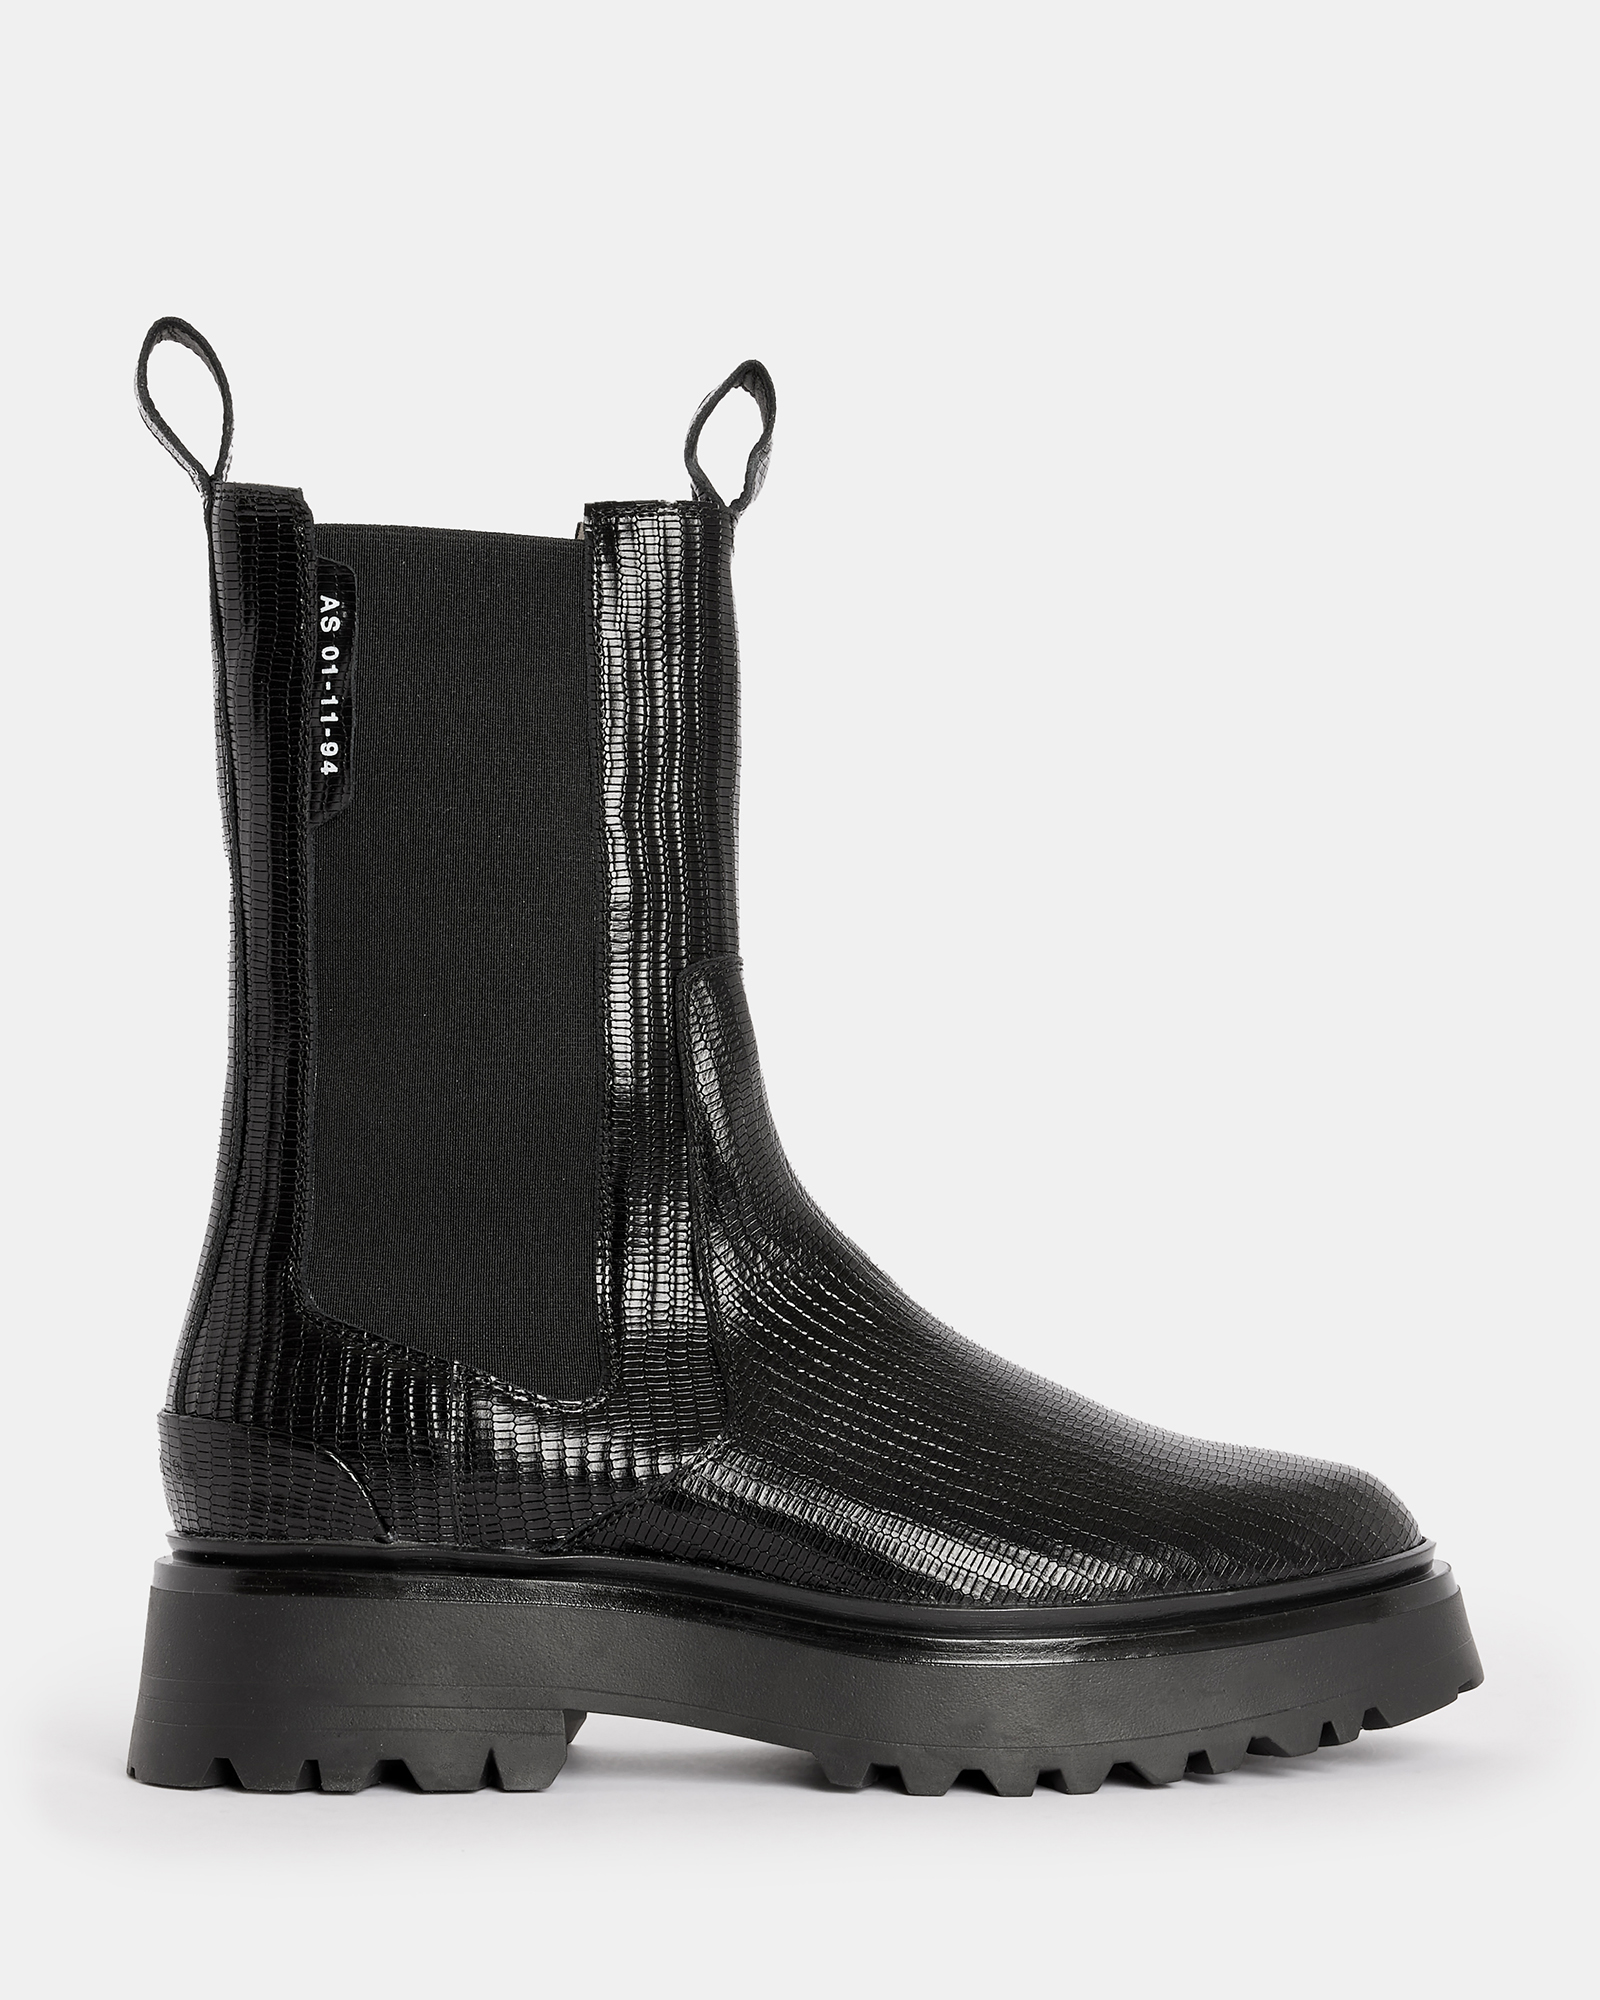 AllSaints Amber Leather Snakeskin Effect Boots